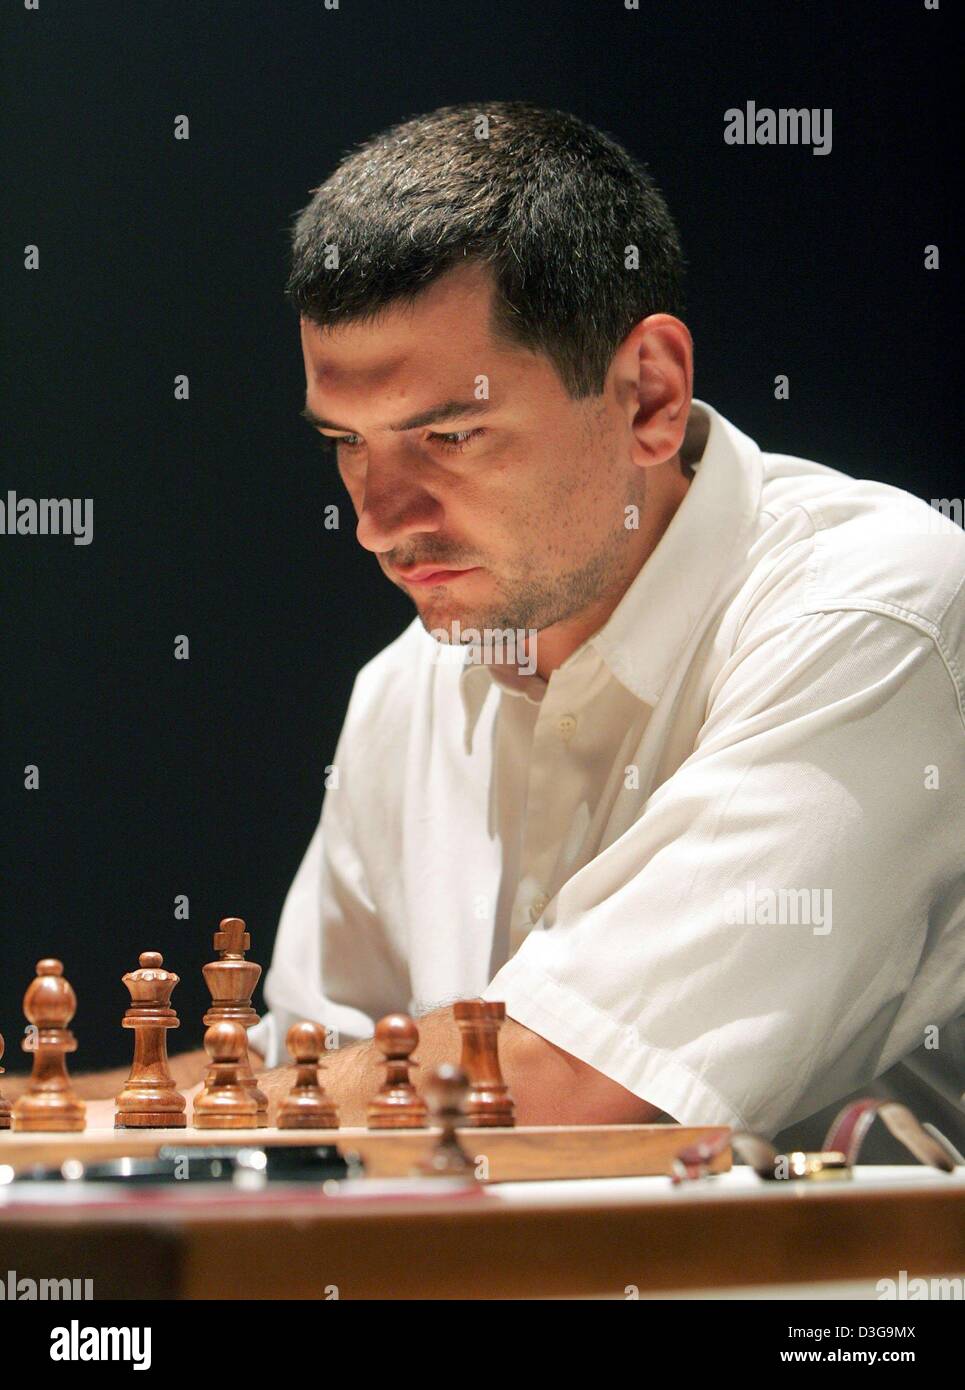 (dpa) - Defending champion Viorel Bologan from Moldova sits in front of a chess board during the 2004 Dortmund Chess Meeting in Dortmund, Germany, 23 April 2004. The event takes place at the Dortmund Theatre from 22 July to 1 August. Stock Photo